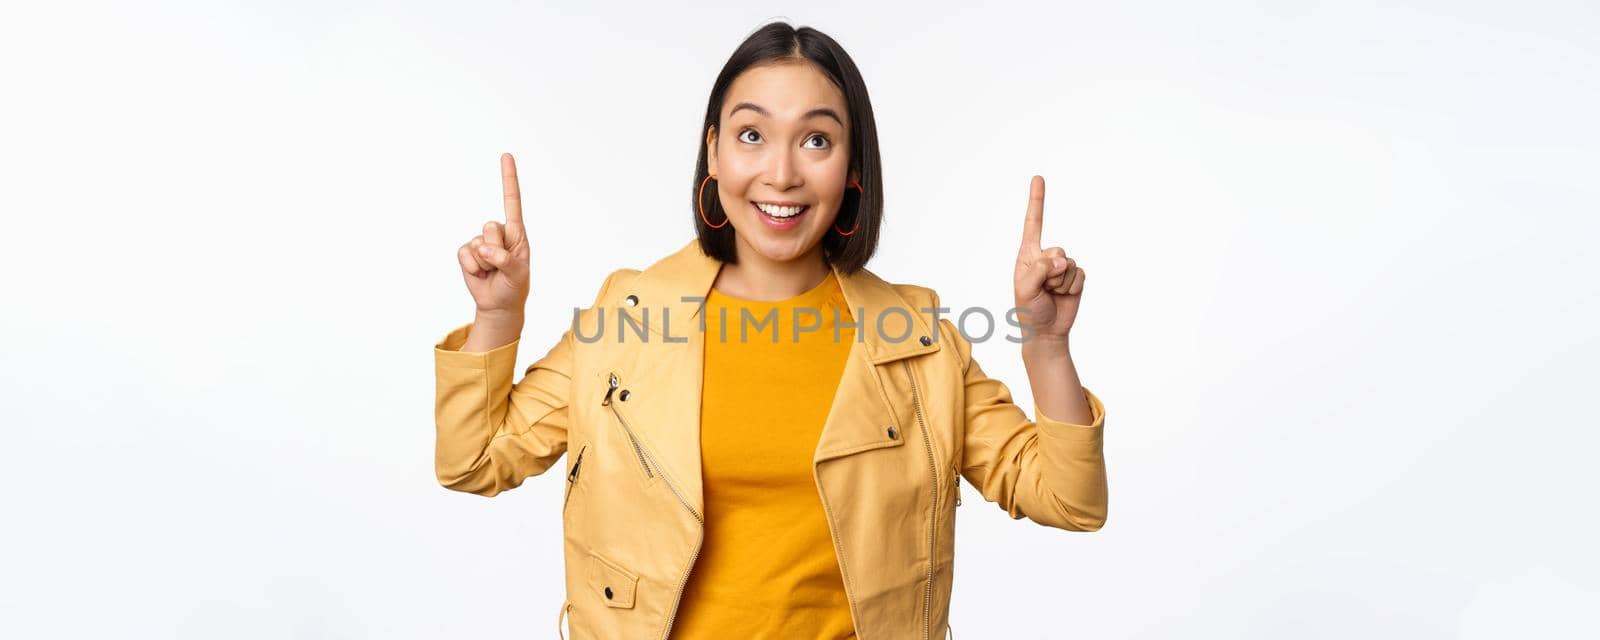 Image of smiling asian brunette woman pointing fingers up, showing advertisement with happy face, posing against white background.